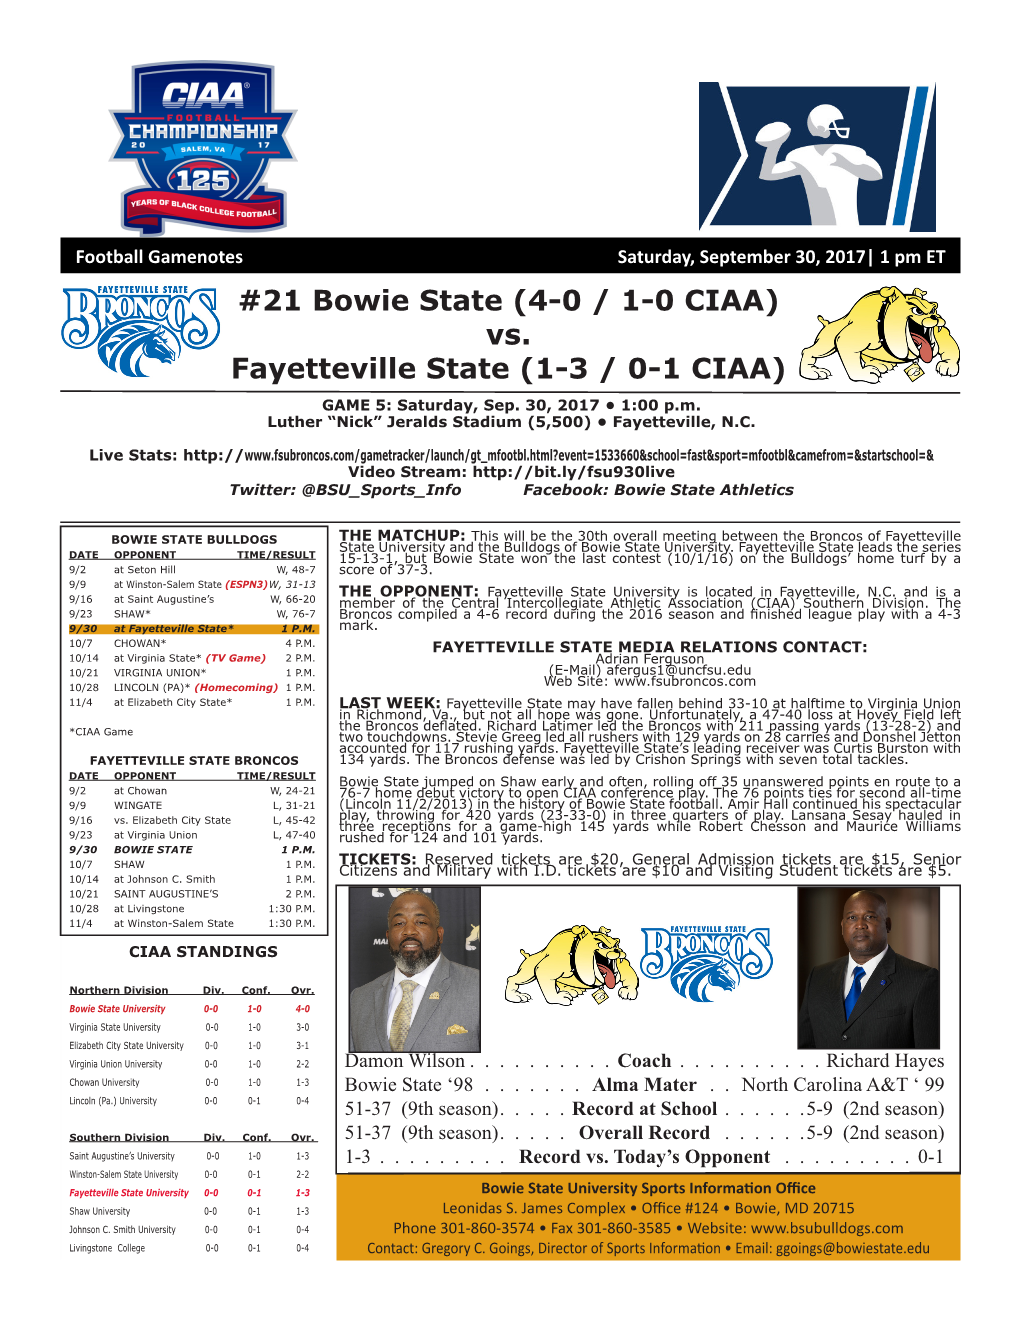 21 Bowie State (4-0 / 1-0 CIAA) Vs. Fayetteville State (1-3 / 0-1 CIAA) GAME 5: Saturday, Sep